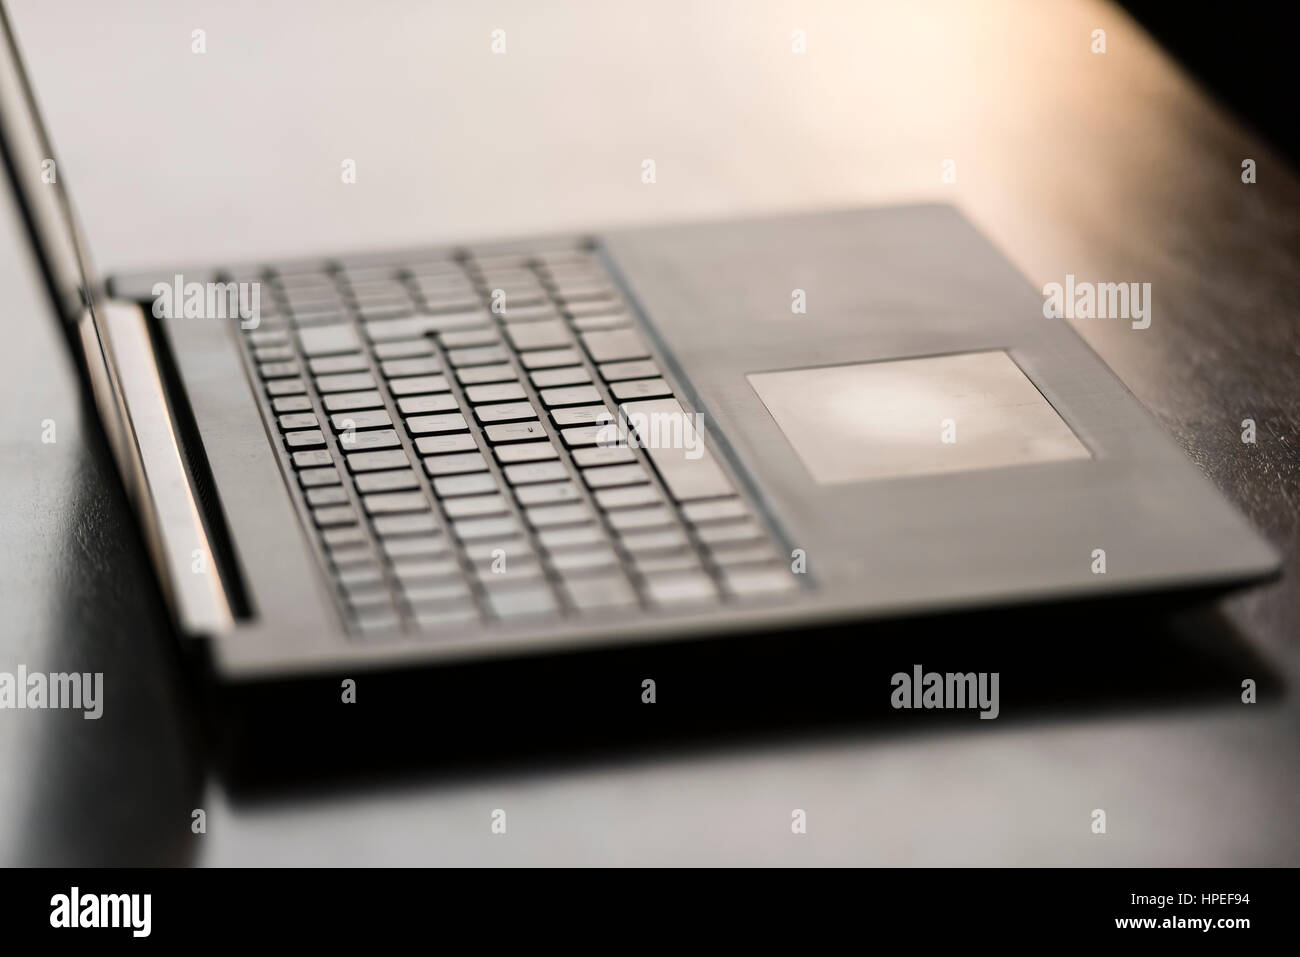 Opened laptop computer on a wooden desk. Focus on touchpad, backlight, no people Stock Photo